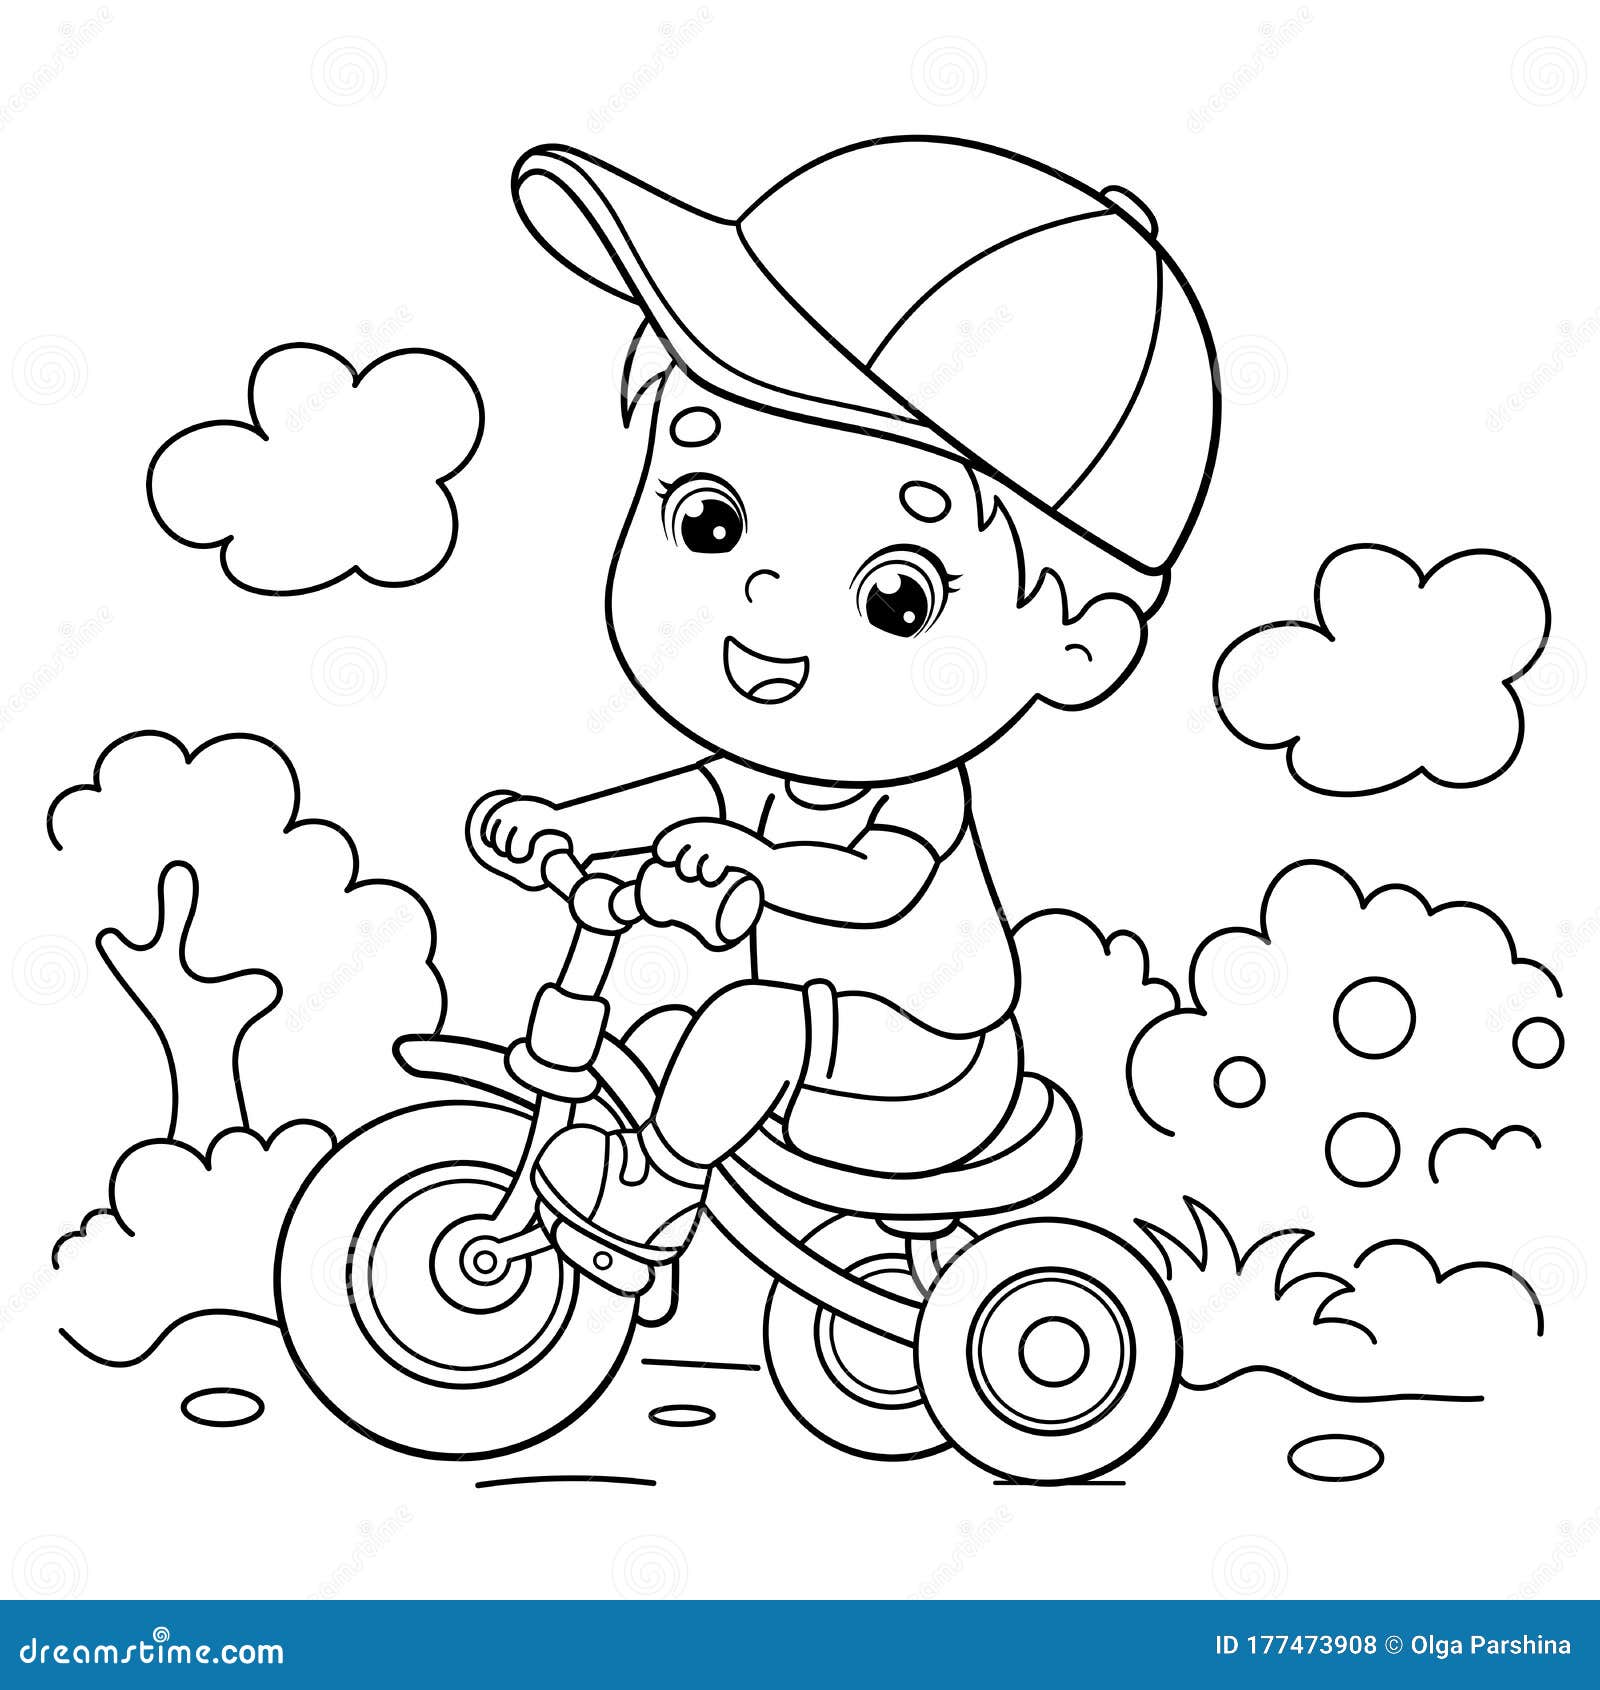 Coloring Page Outline Of A Cartoon Boy Riding A Bicycle Or Bike